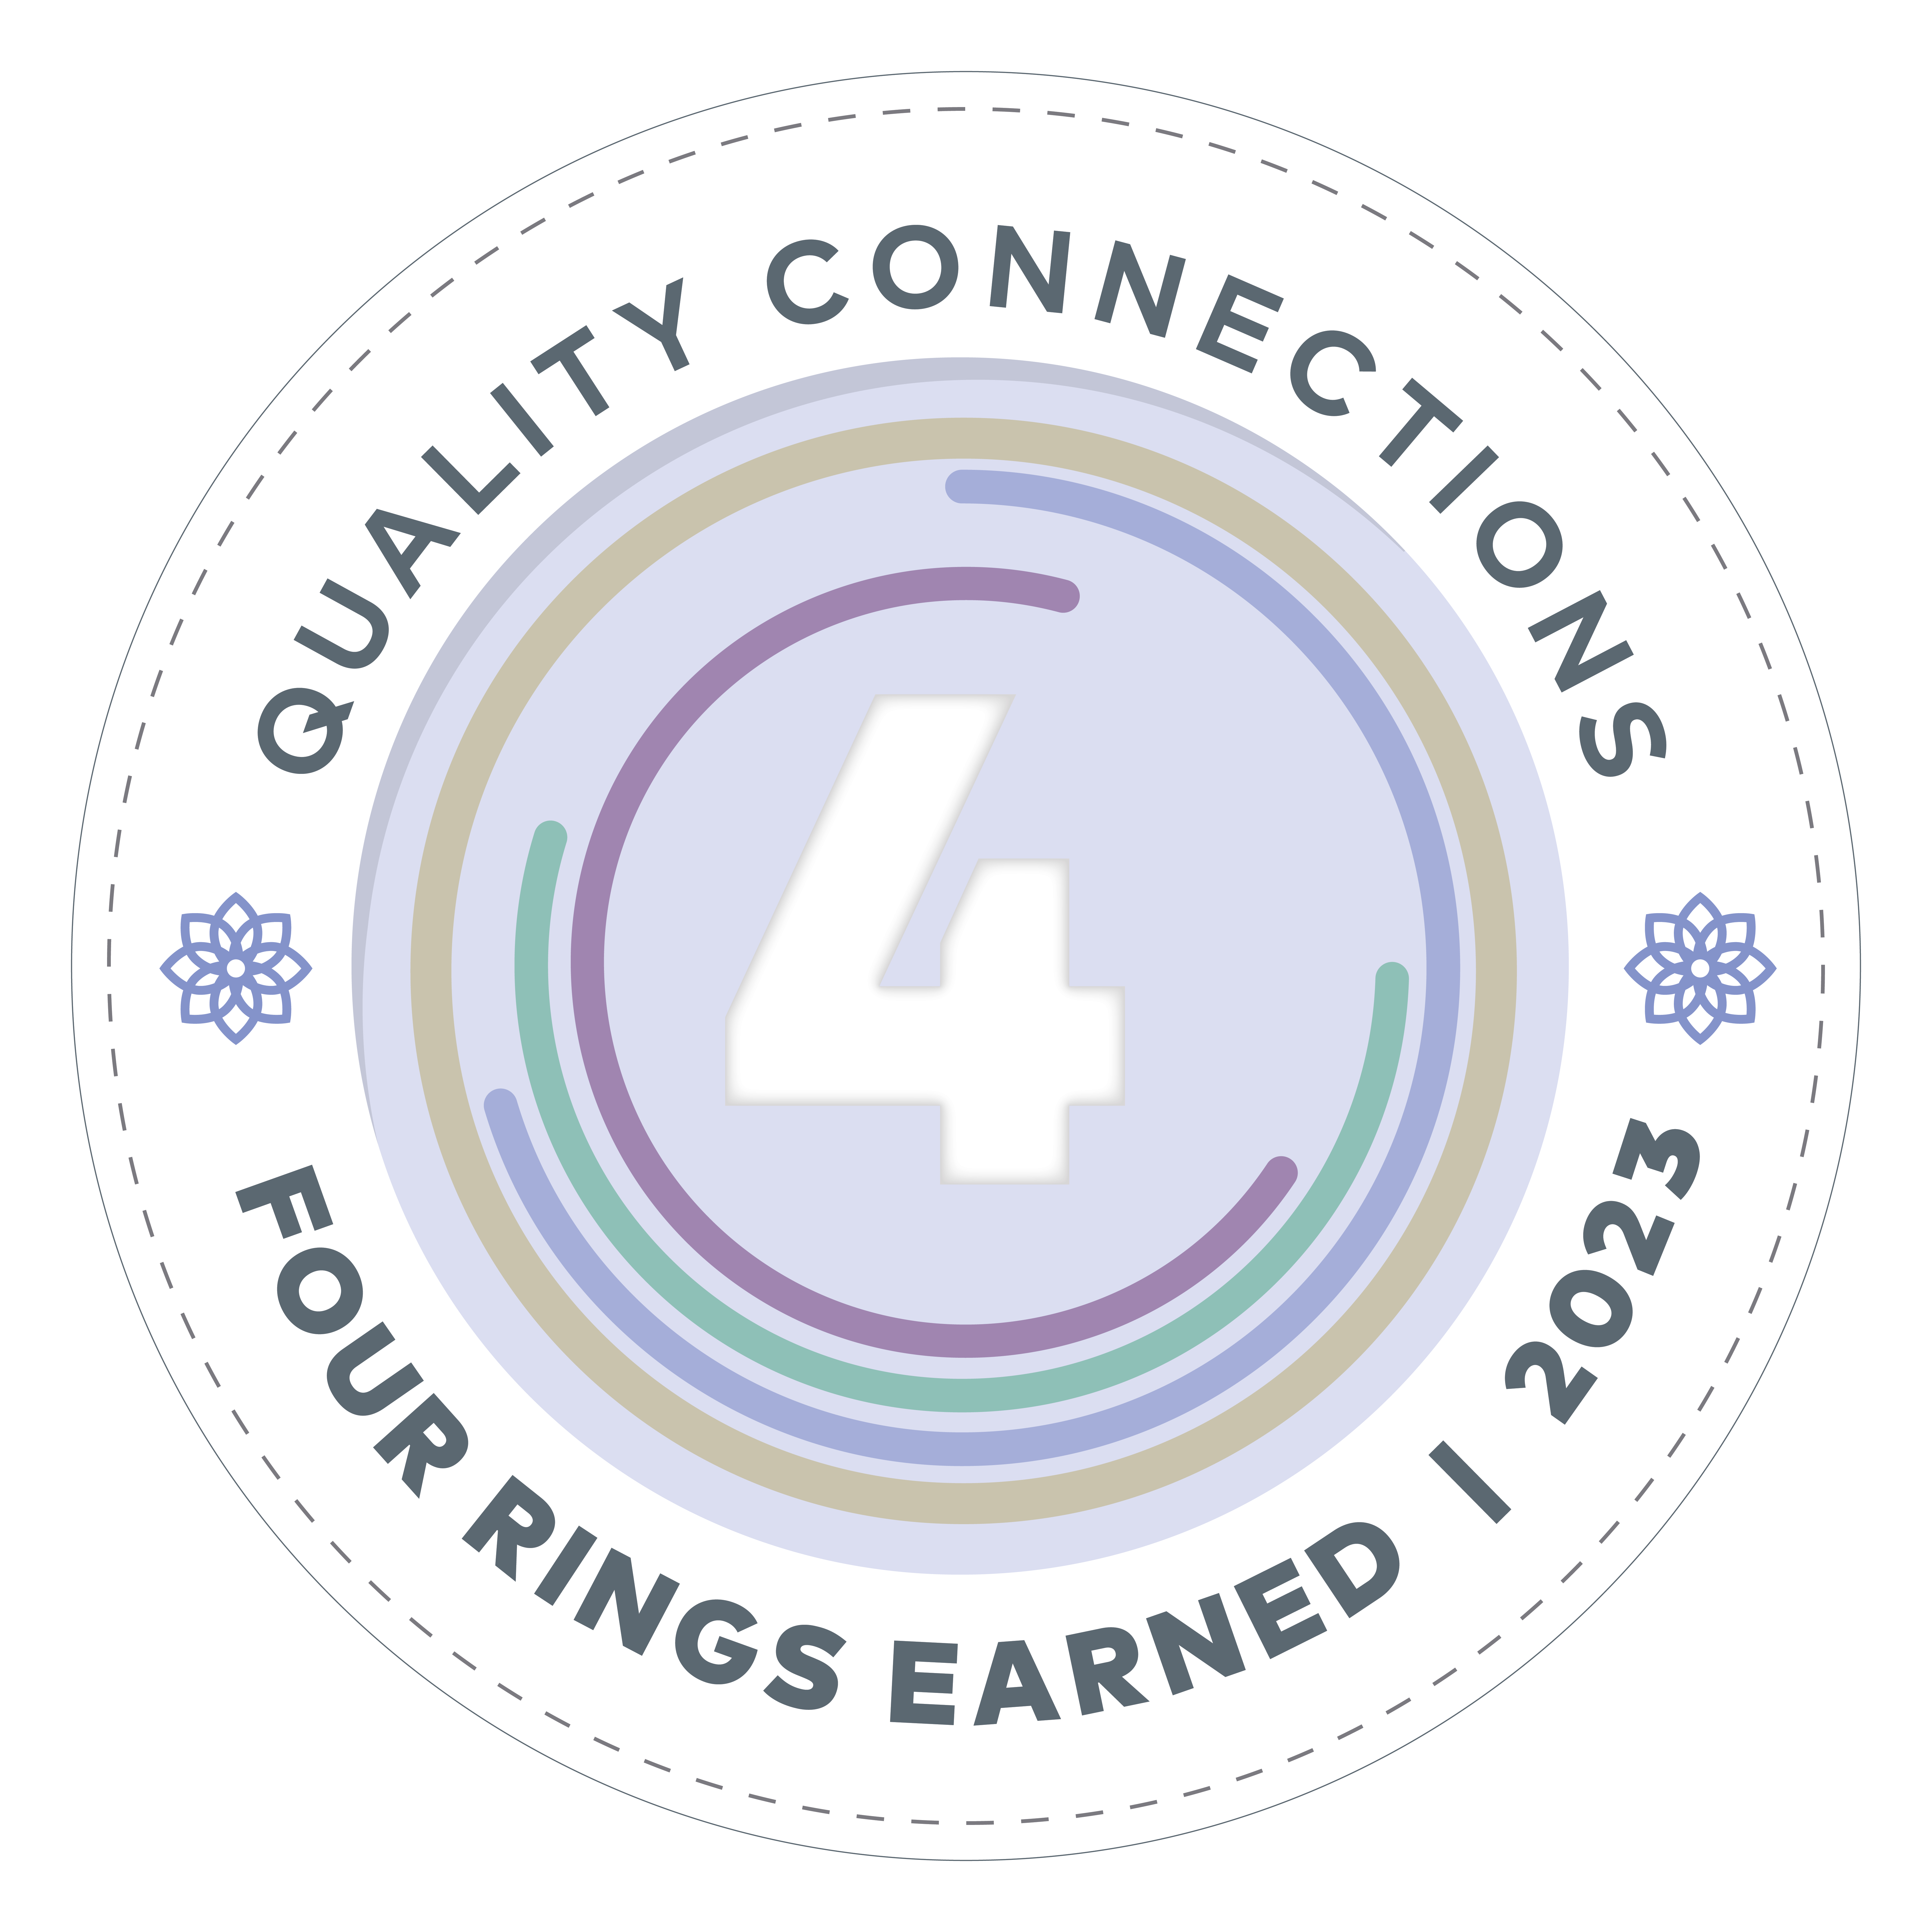 Quality Connections Program Badge